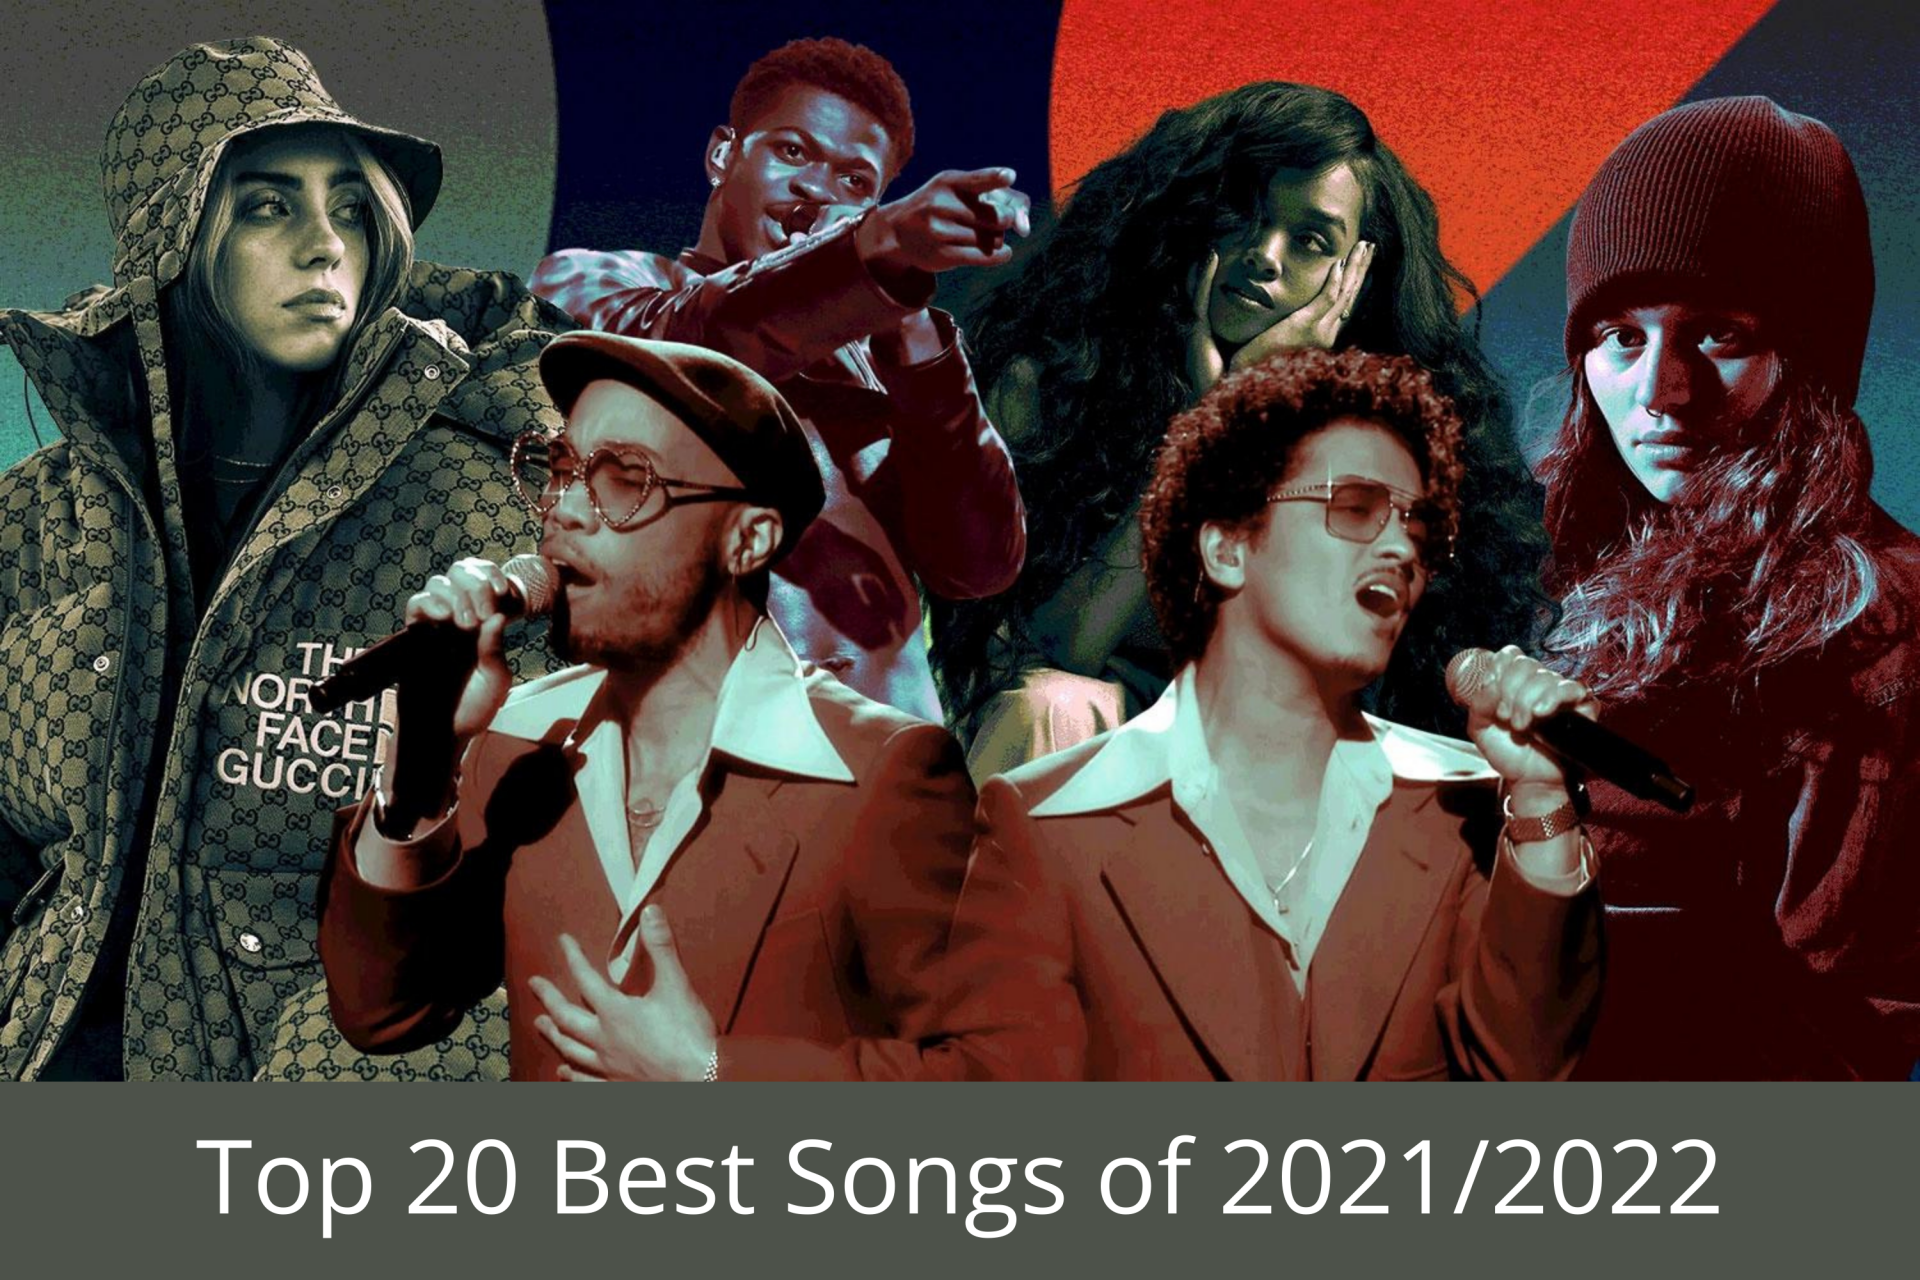 Top 20 Best &Greatest Songs in the World 2021/2022